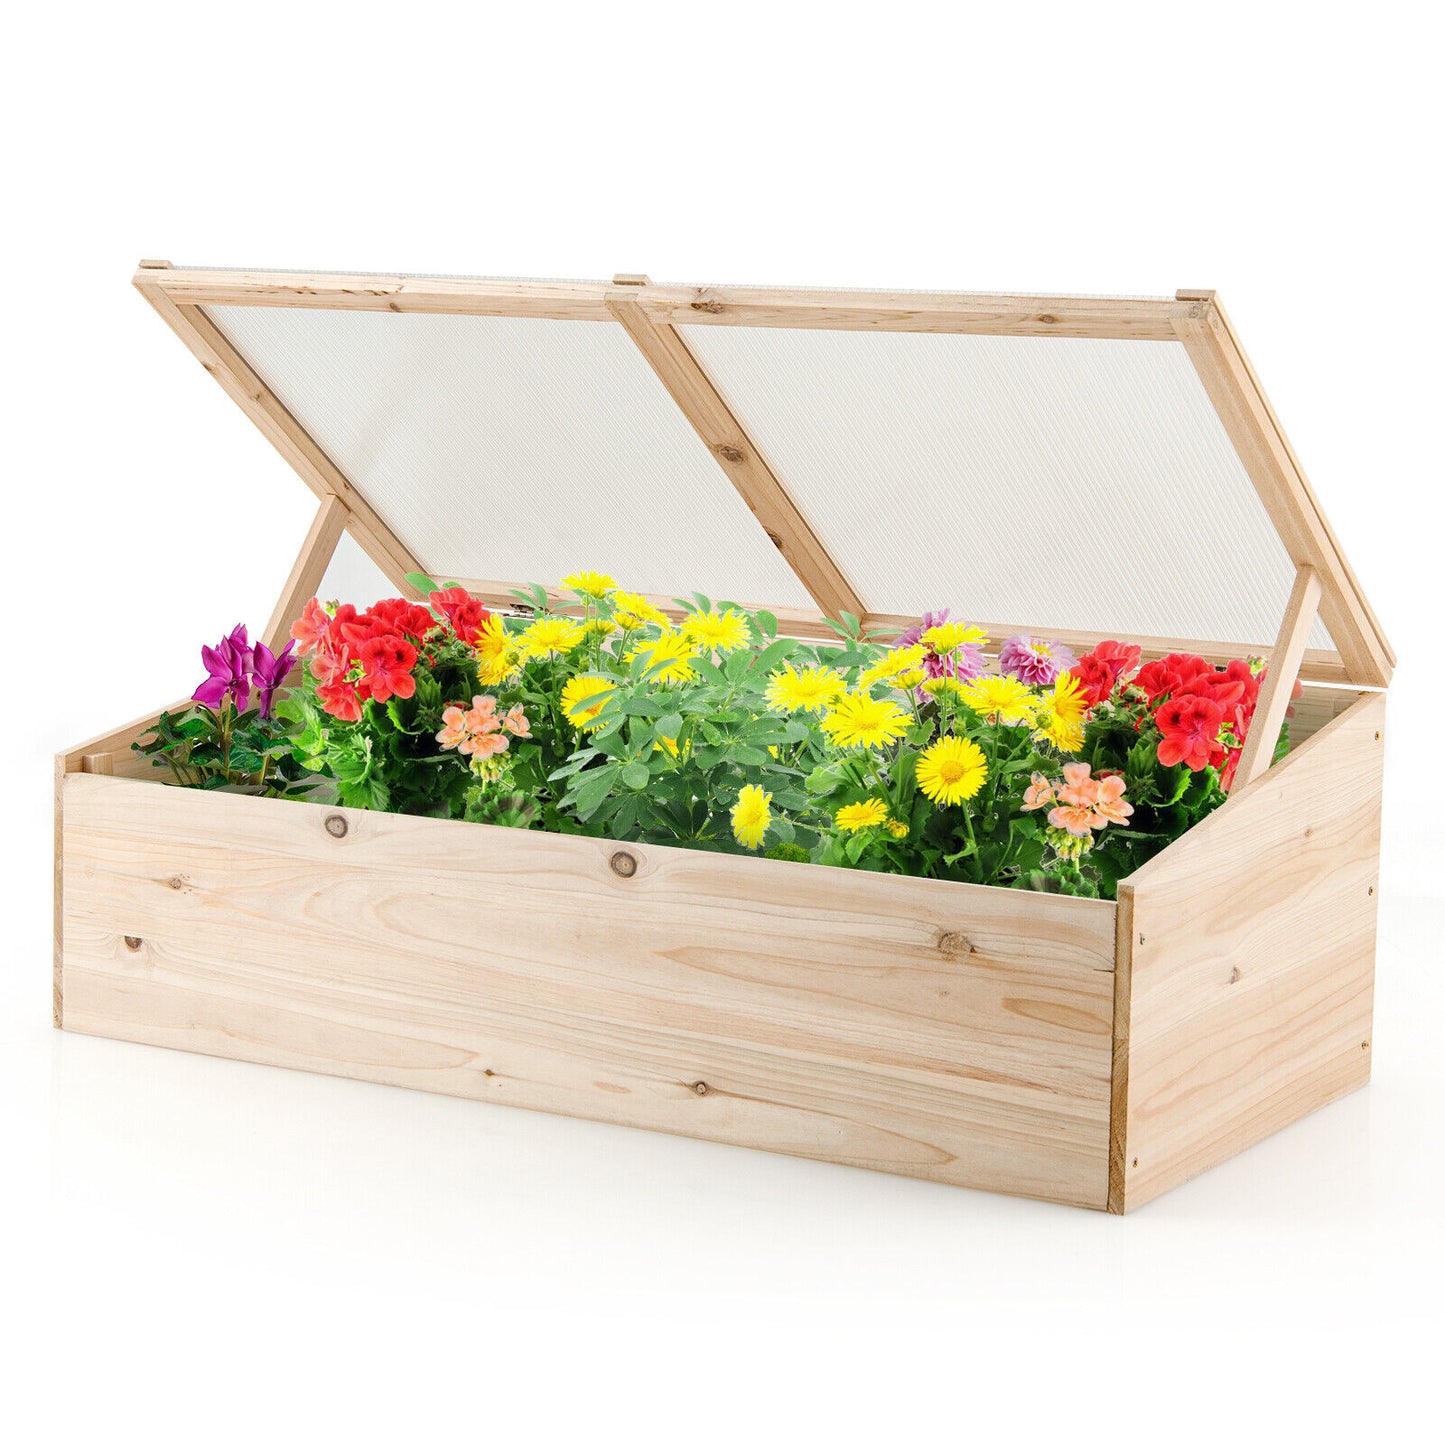 Greenhouse - 39 Inches Wooden Cold Frame Mini Greenhouse